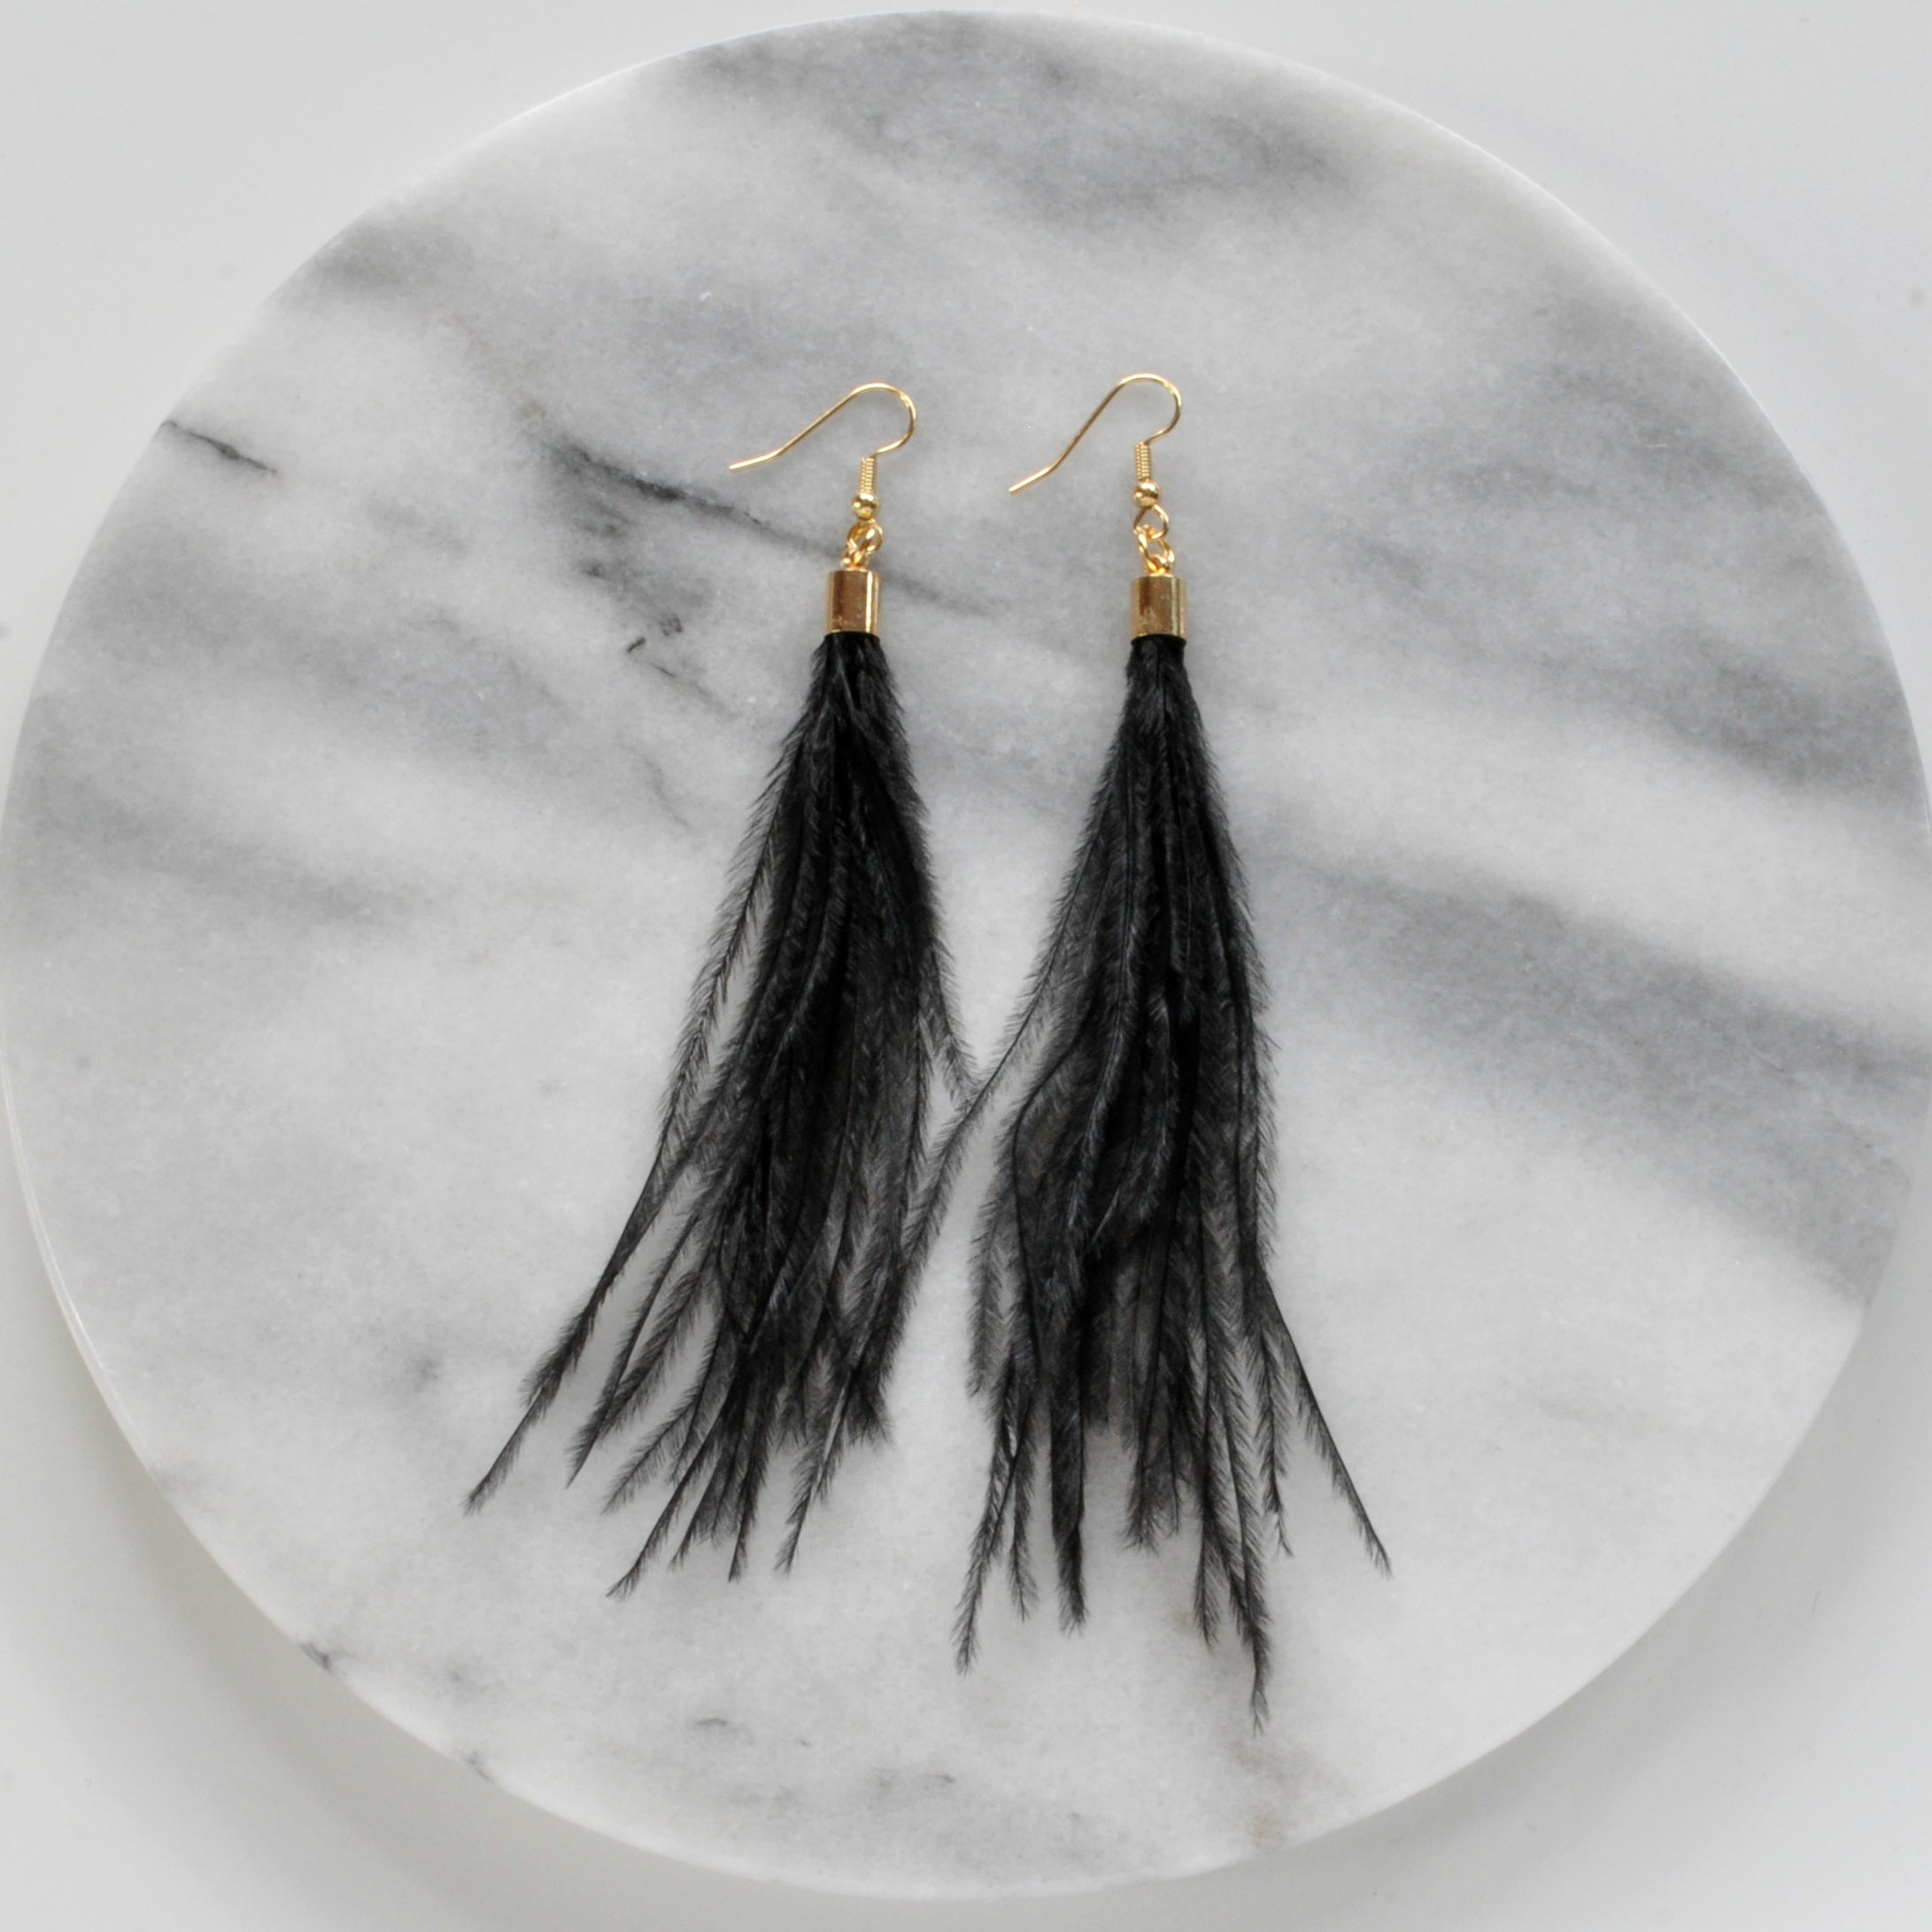 Libby & Smee Black Feather Earrings with Gold Caps, Still Life